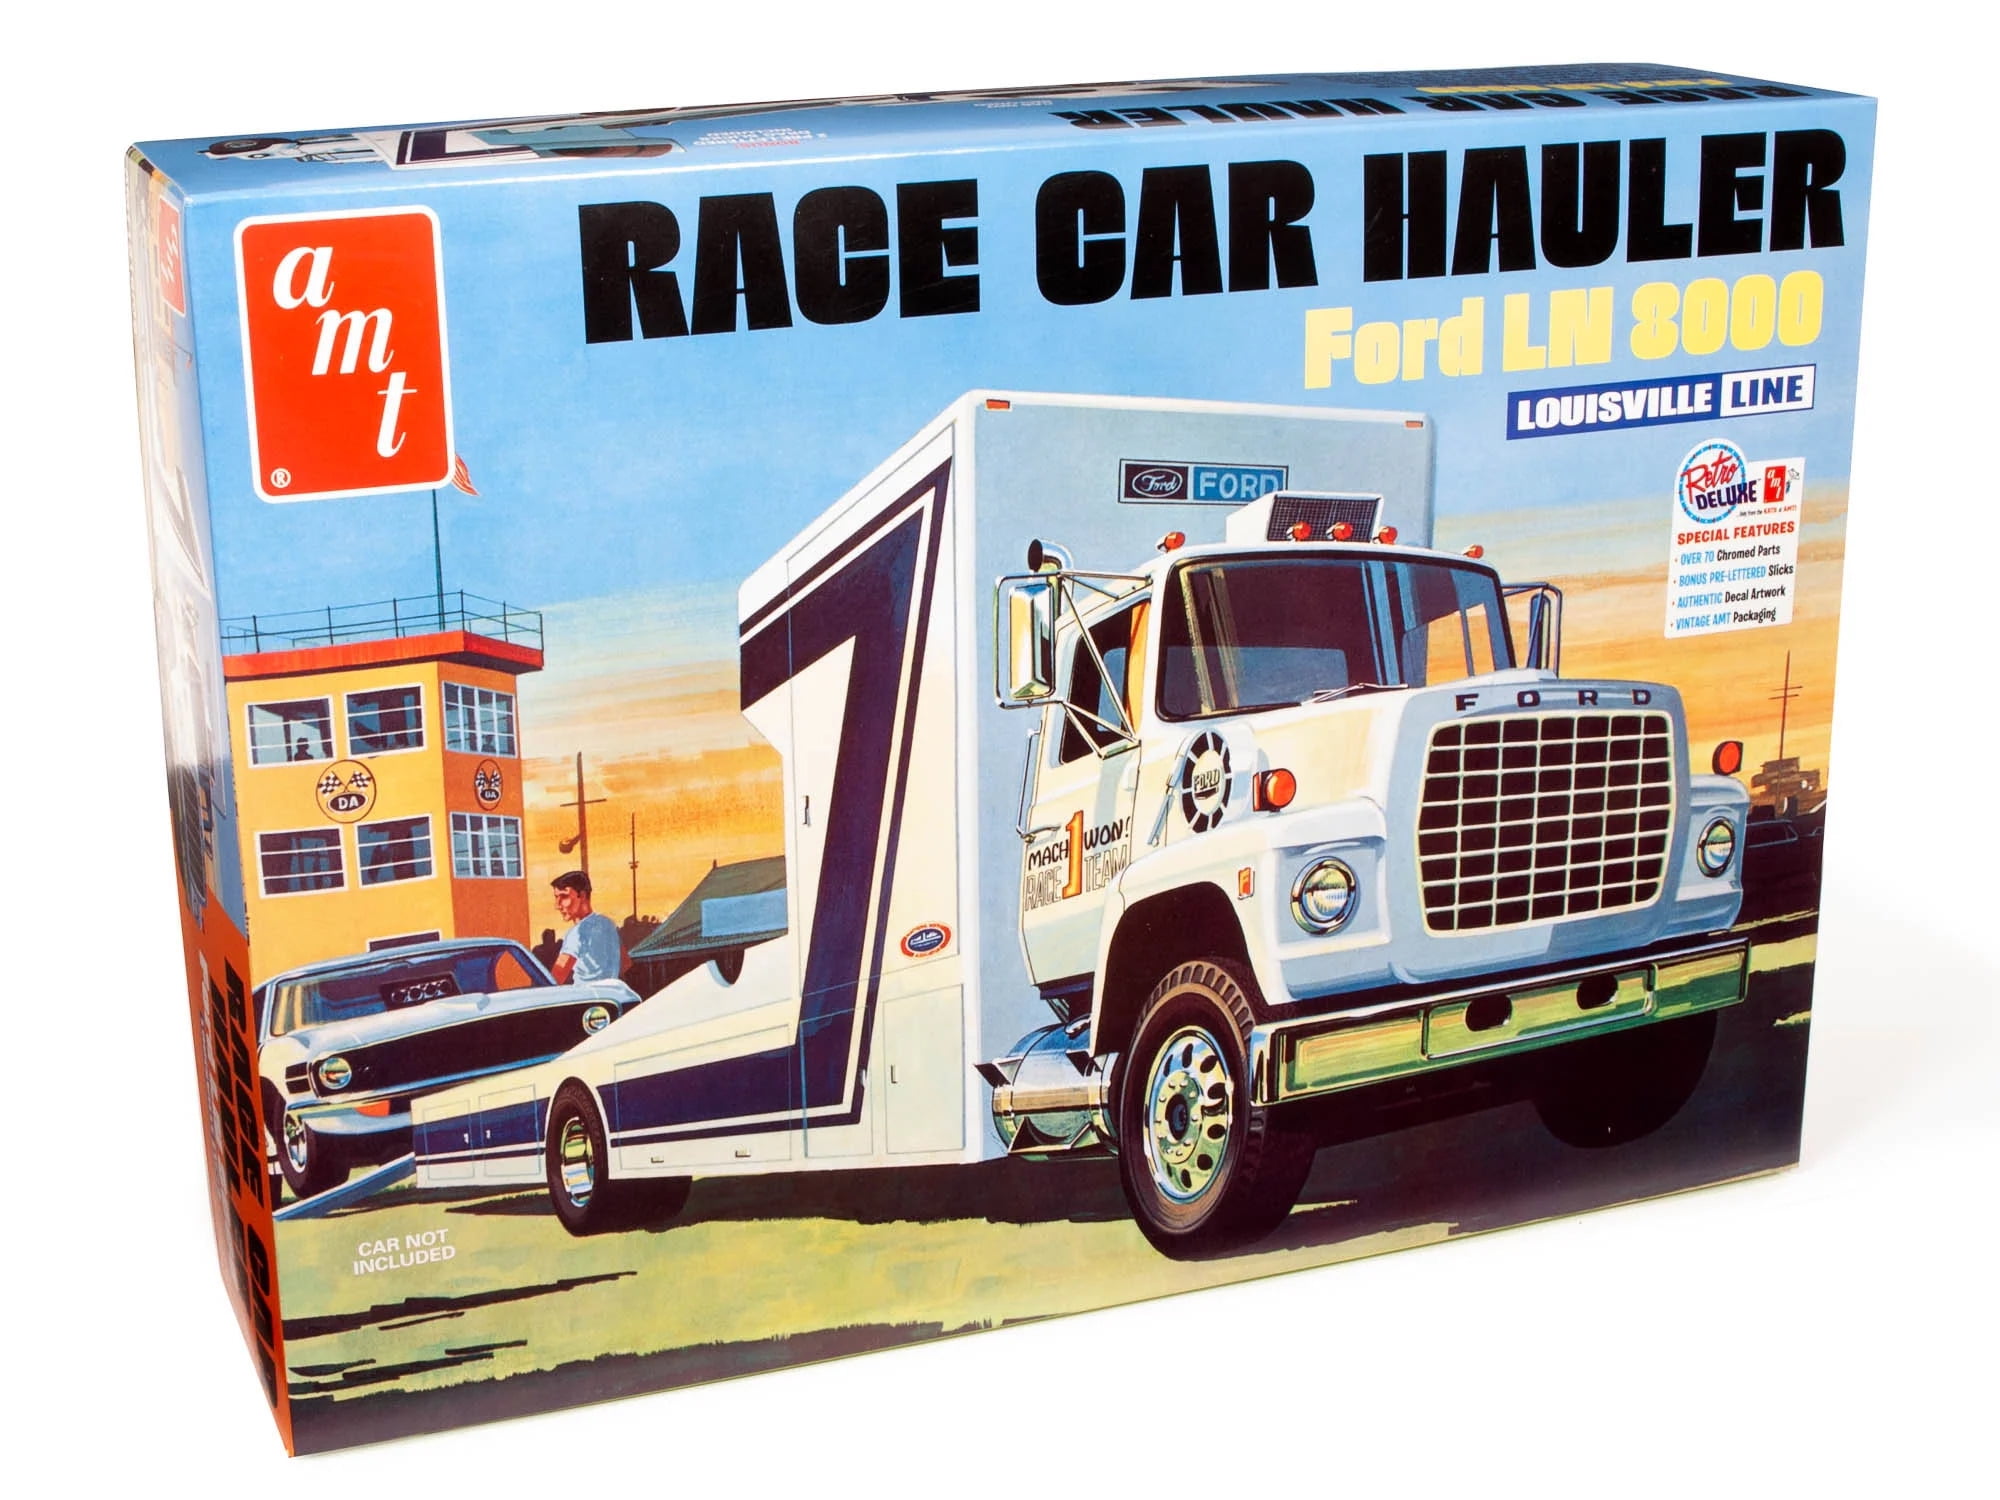 Picture of AMT AMT1316 Skill 3 Model Kit - 1 by 25 Scale Model for Ford LN 8000 Race Car Hauler Louisville Line